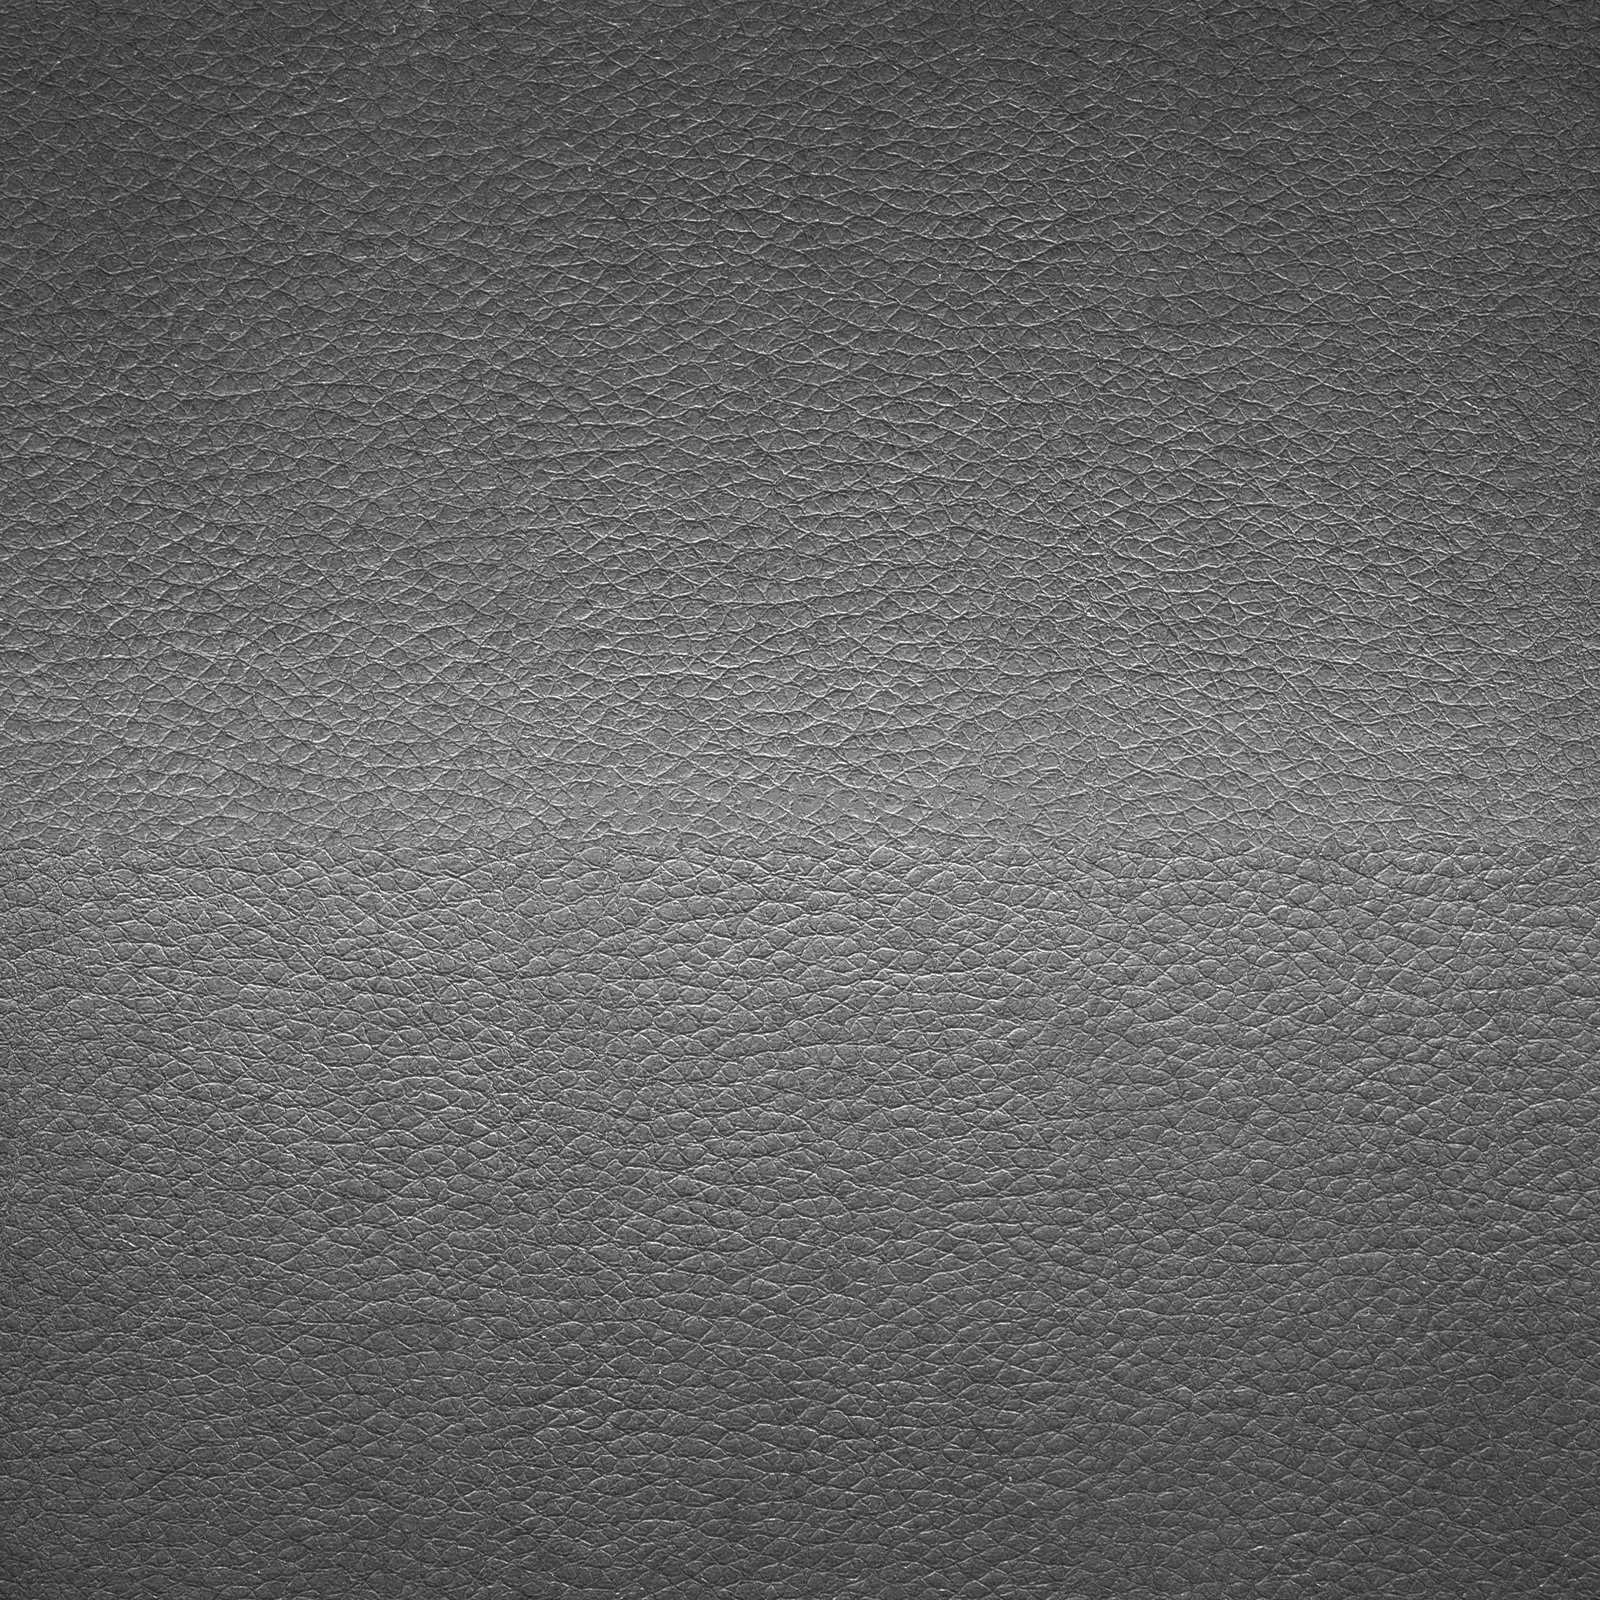 Black leather texture for background 